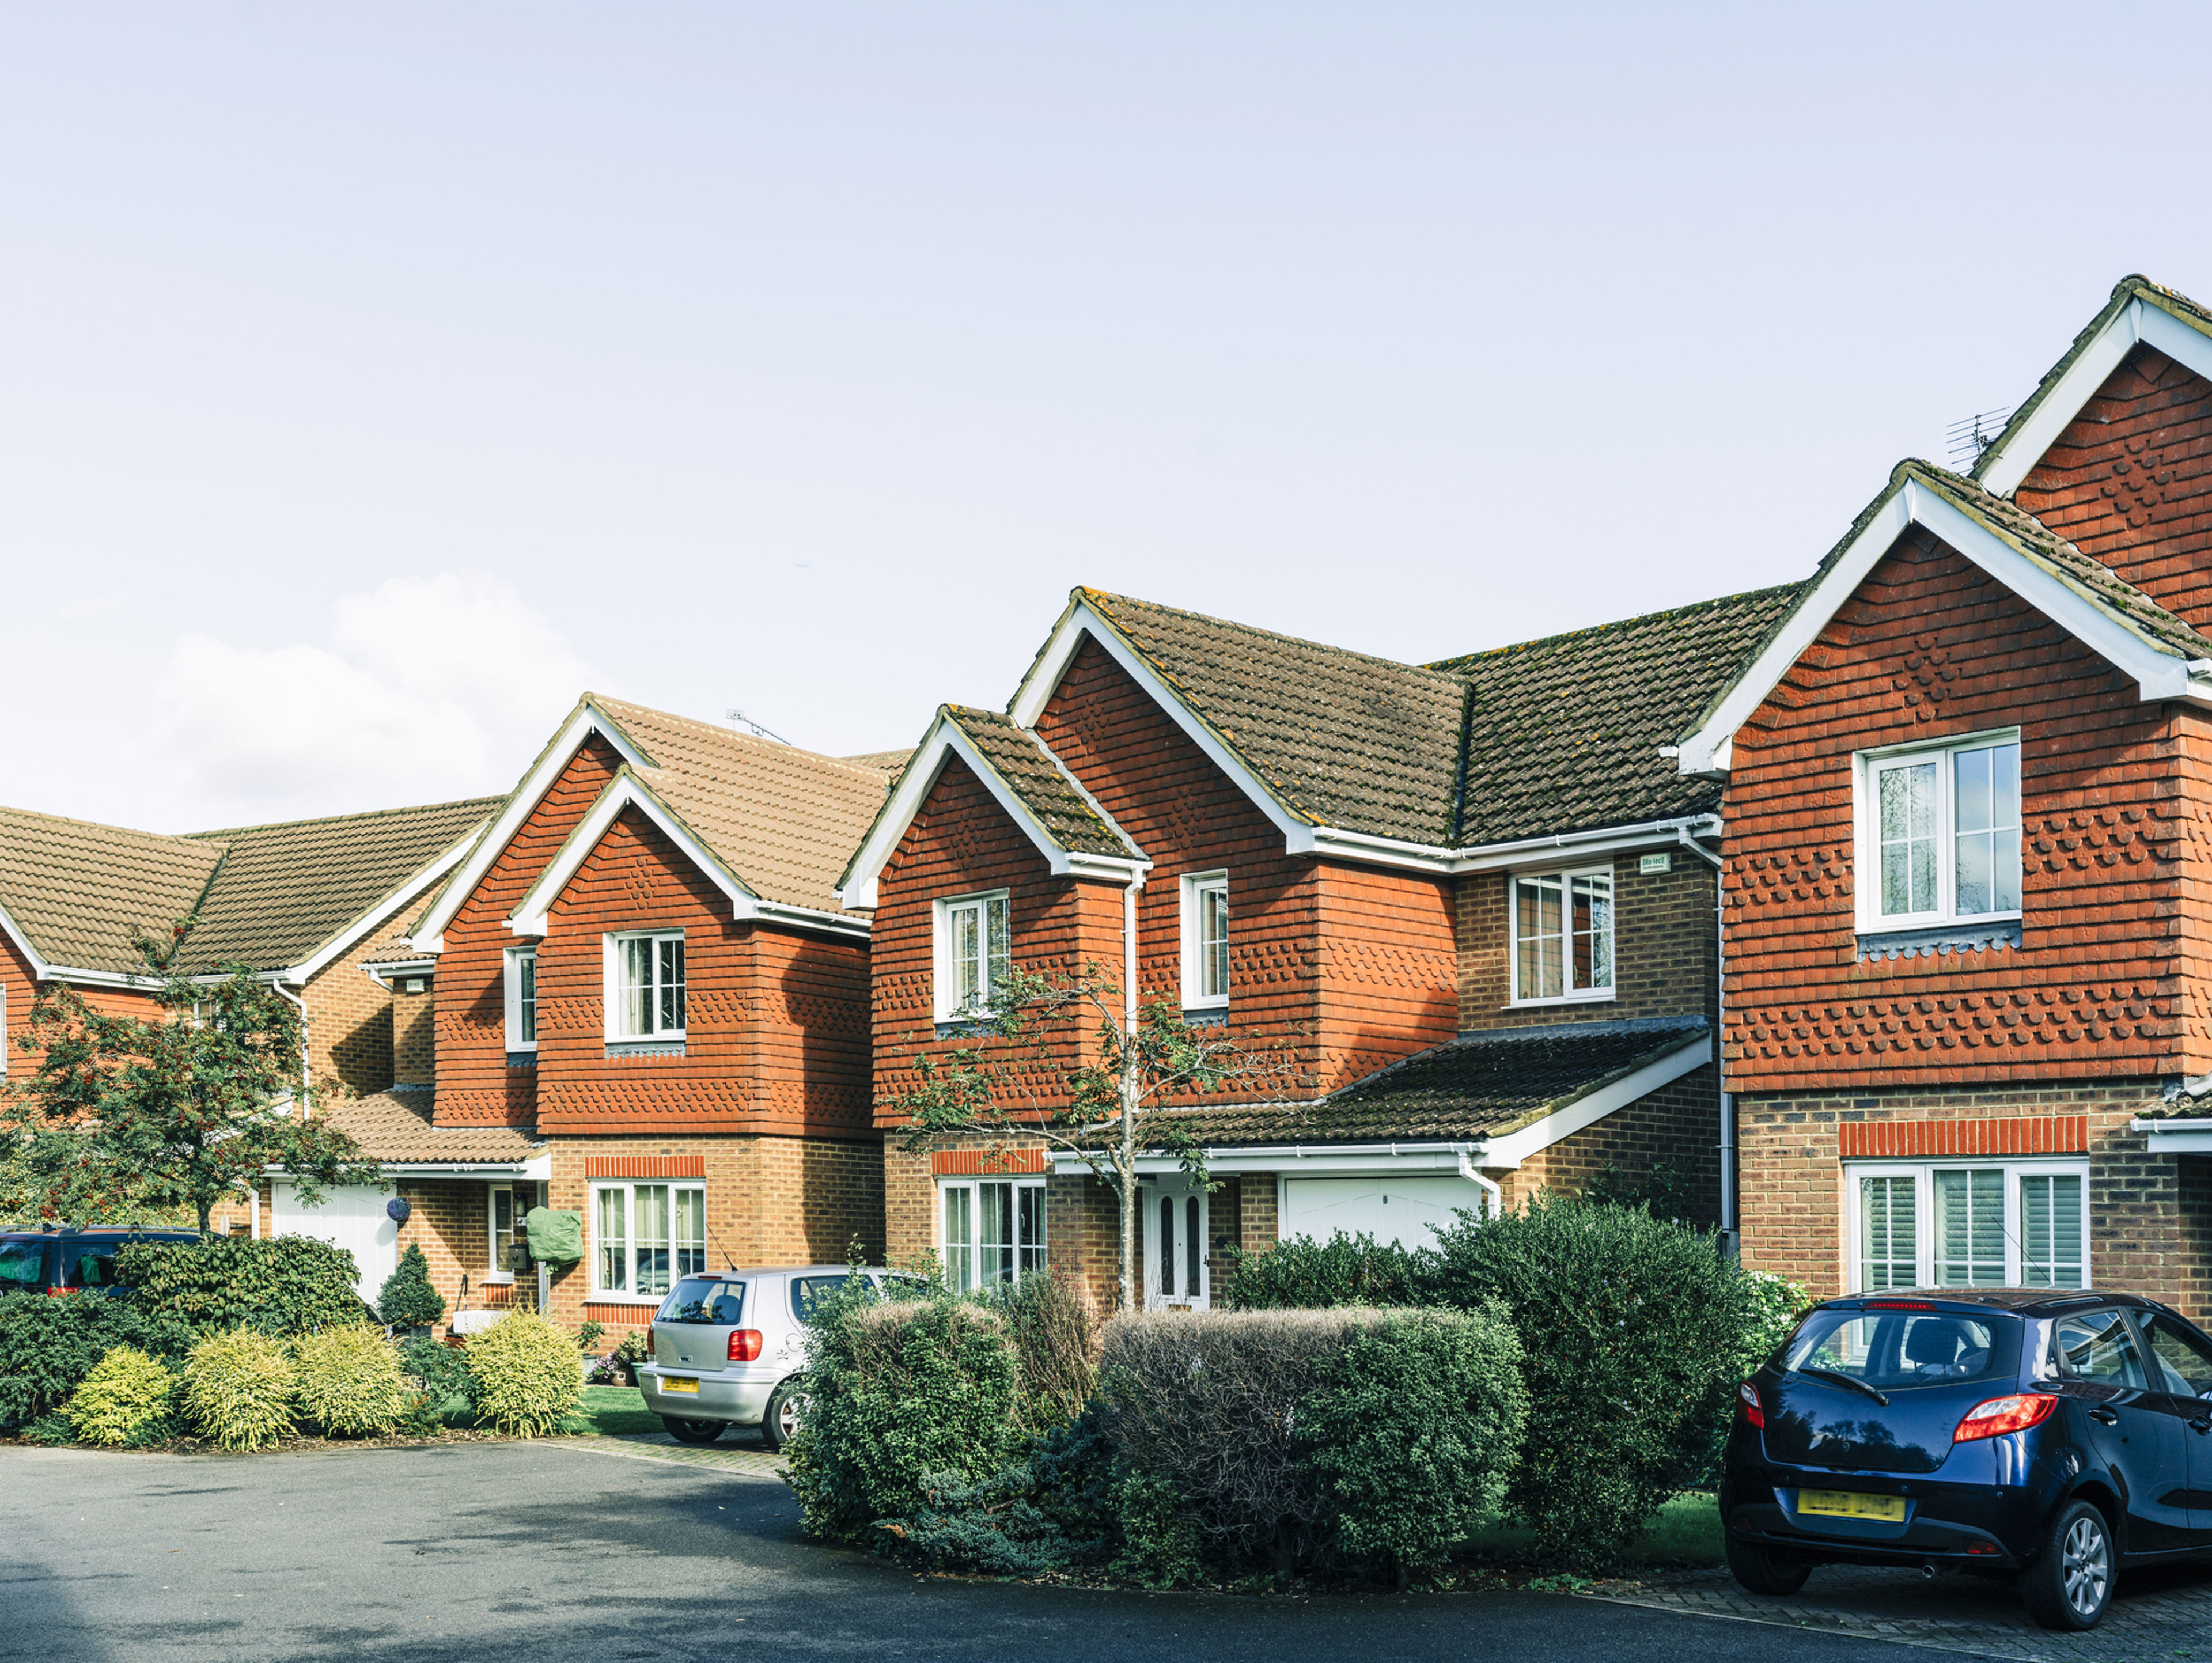 A picture of semi detached houses in a suburban setting